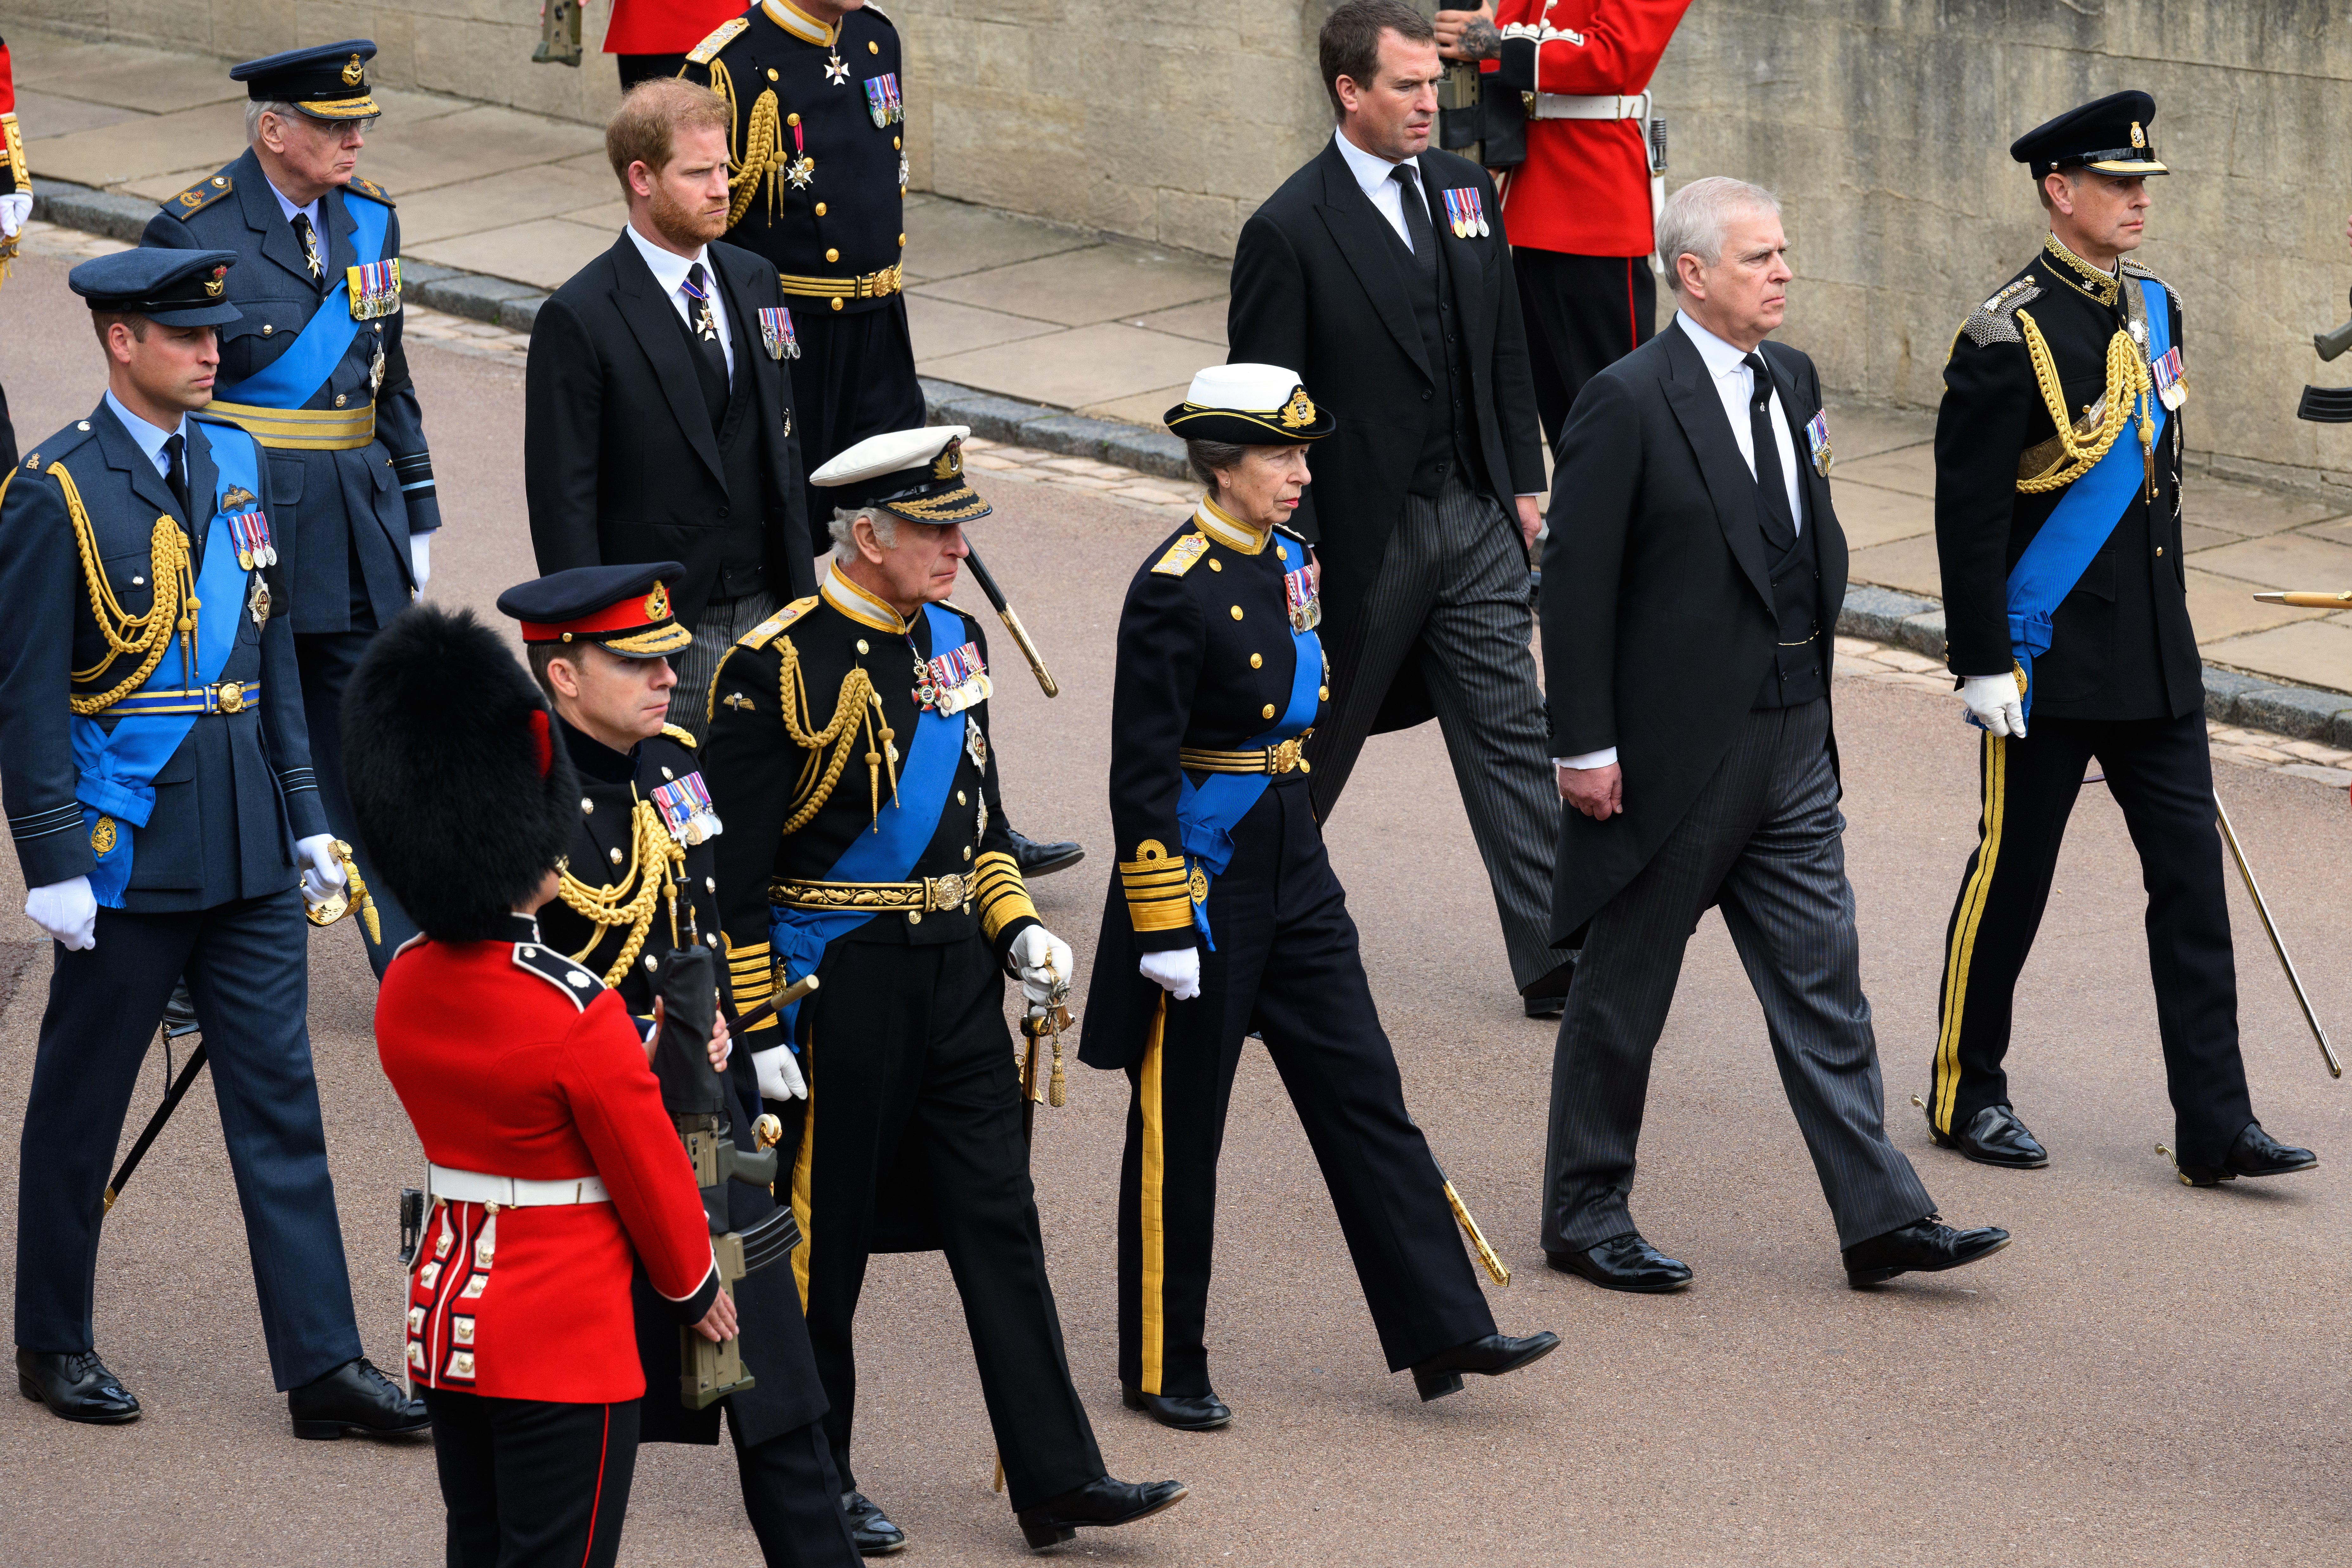 Royal family members took part in Monday’s procession (Leon Neal/PA)